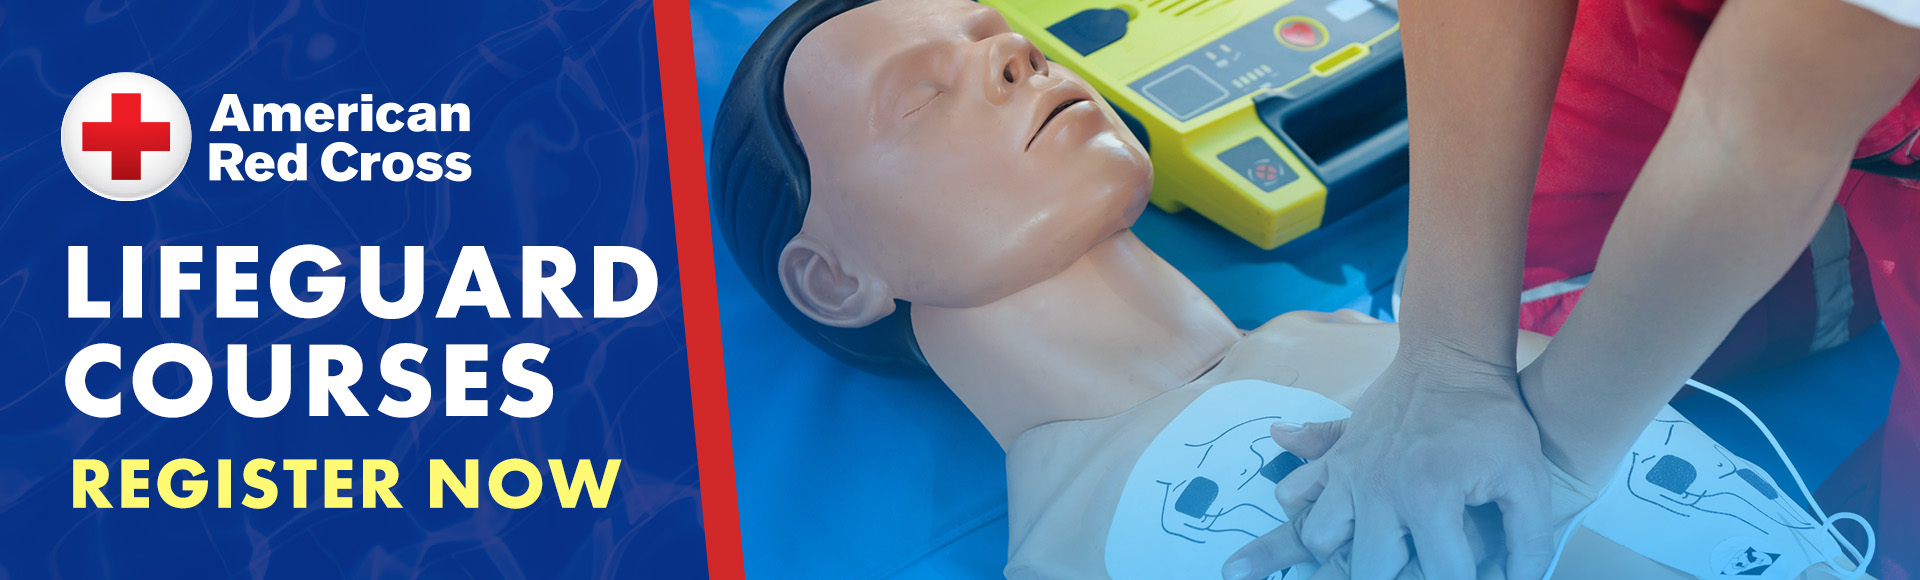 American Red Cross Logo. Blended Learning Lifeguard Courses. Register Now. Photo of arms doing CPR on a first aid mannequin.